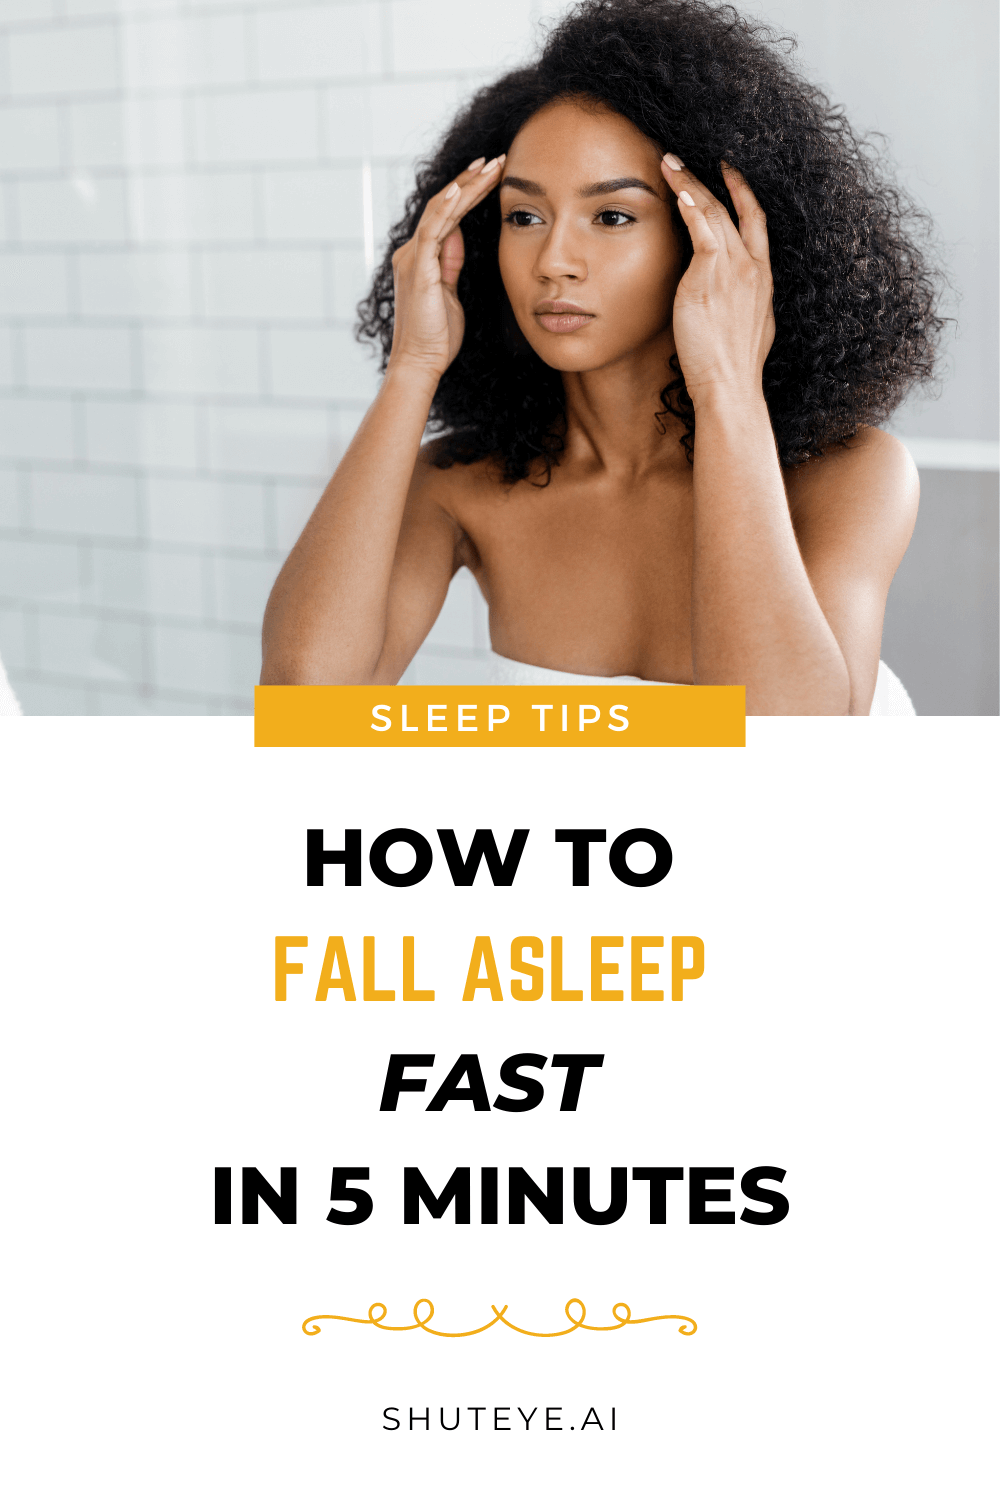 How to Fall Asleep Fast in 5 Minutes